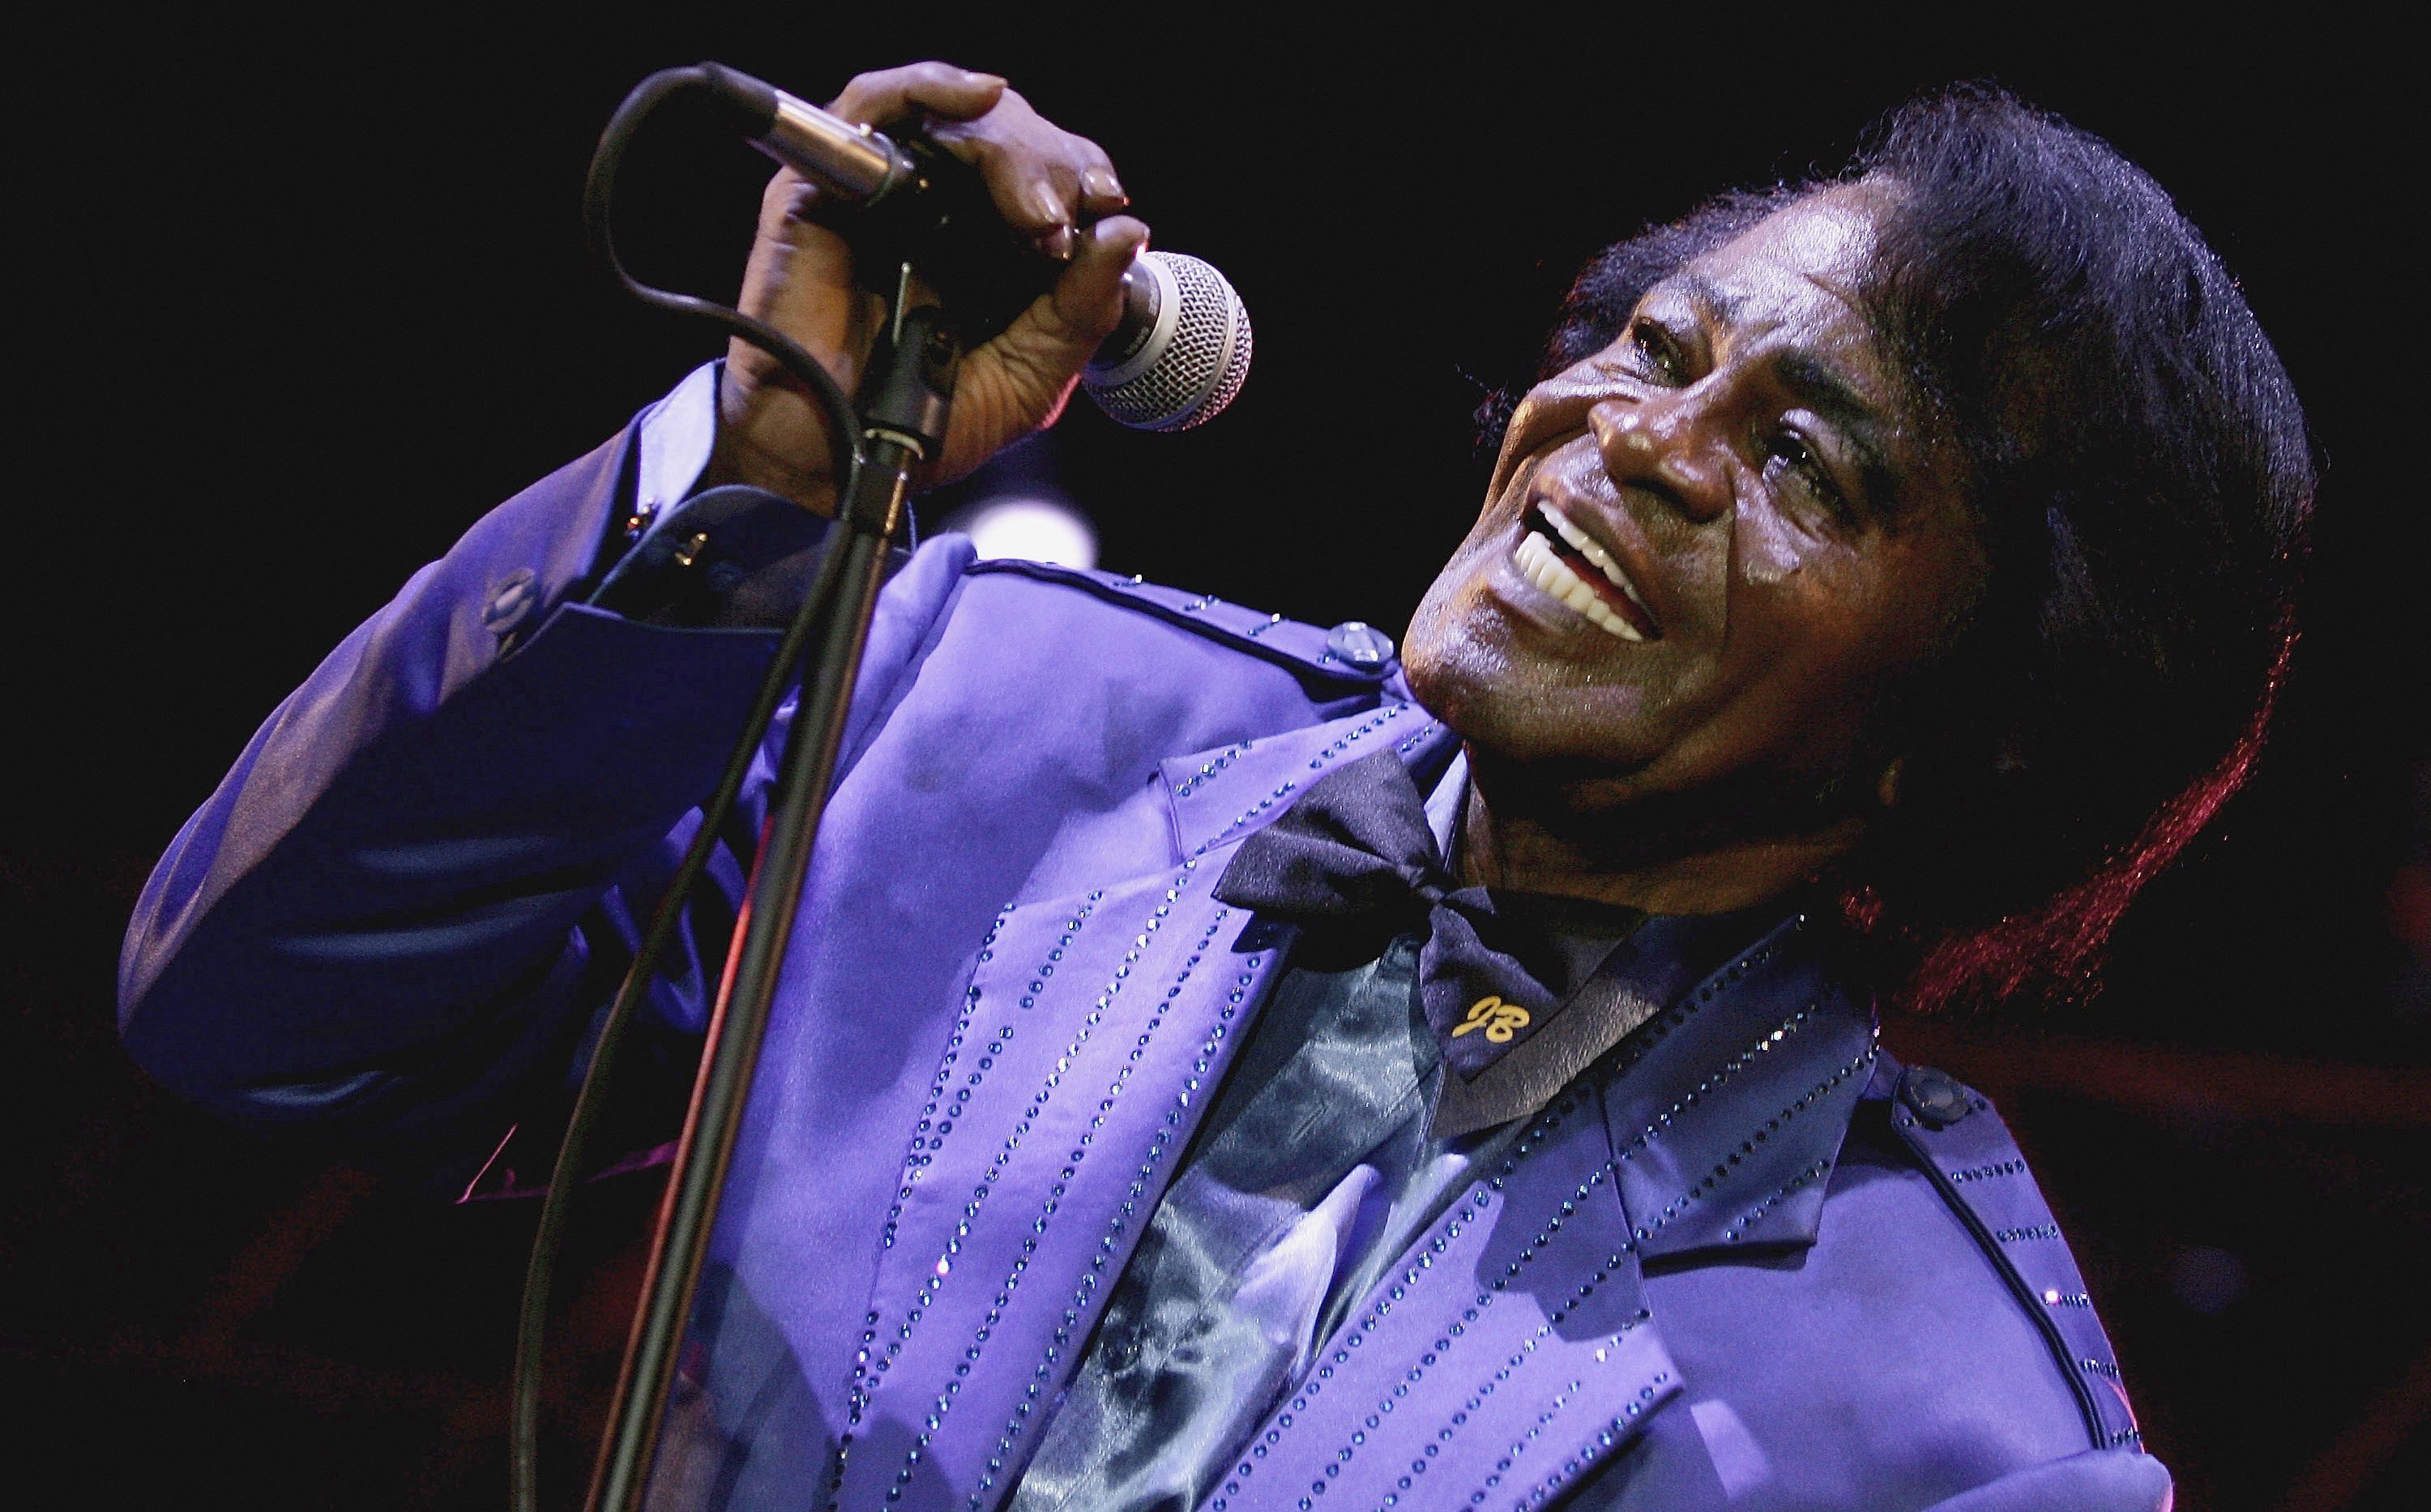 Singer James Brown performs as part of HM Tower Of London Festival Of Music's inaugural jazz and opera festival at HM Tower of London on July 4, 2006 | Photo: Getty Images